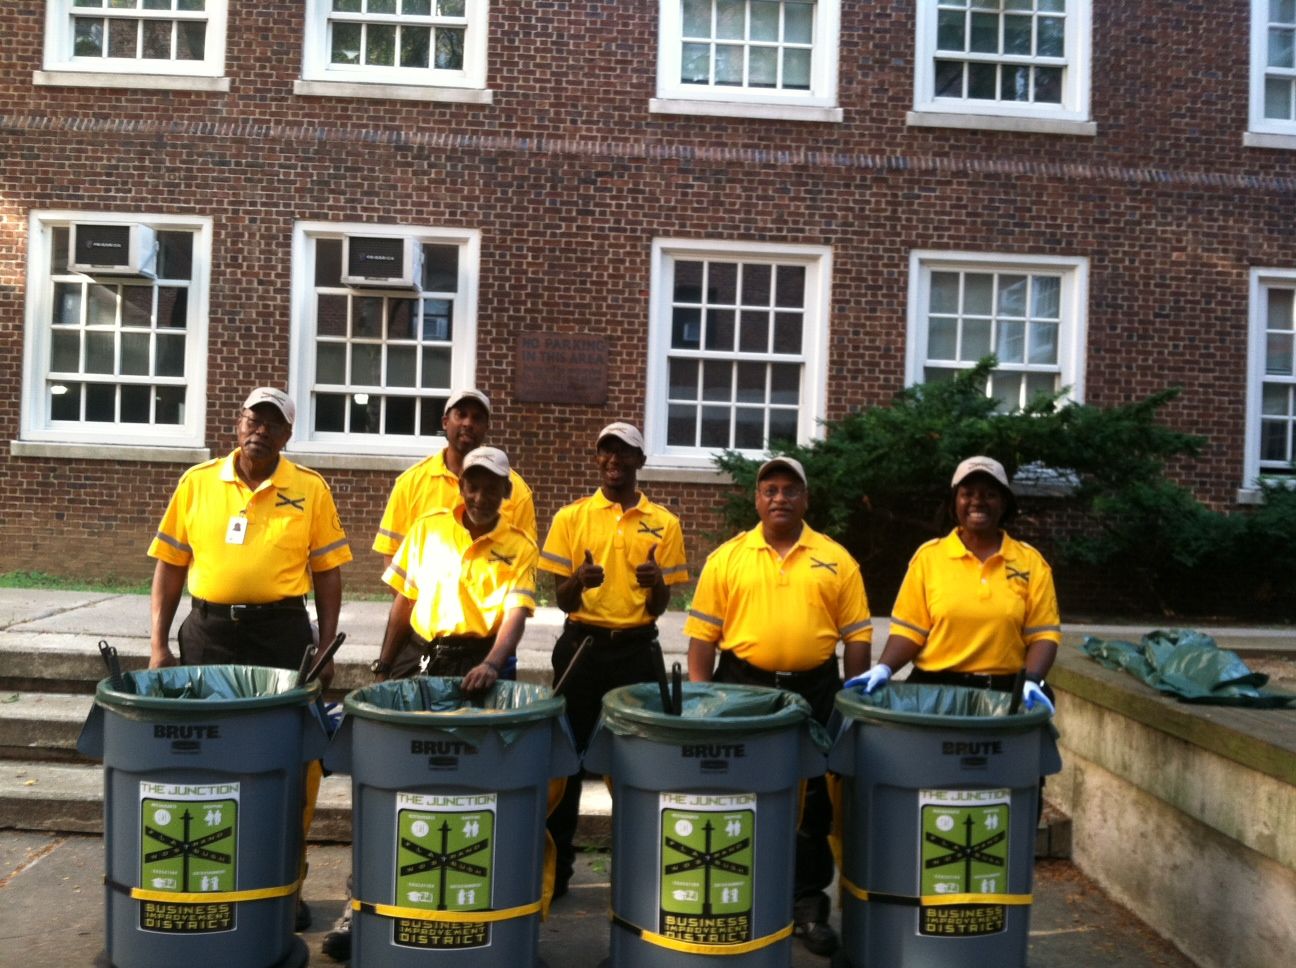 New Sanitation Crew Begins Cleaning The Flatbush-Nostrand Junction; Will Paint Over Graffiti, Remove Weeds & More